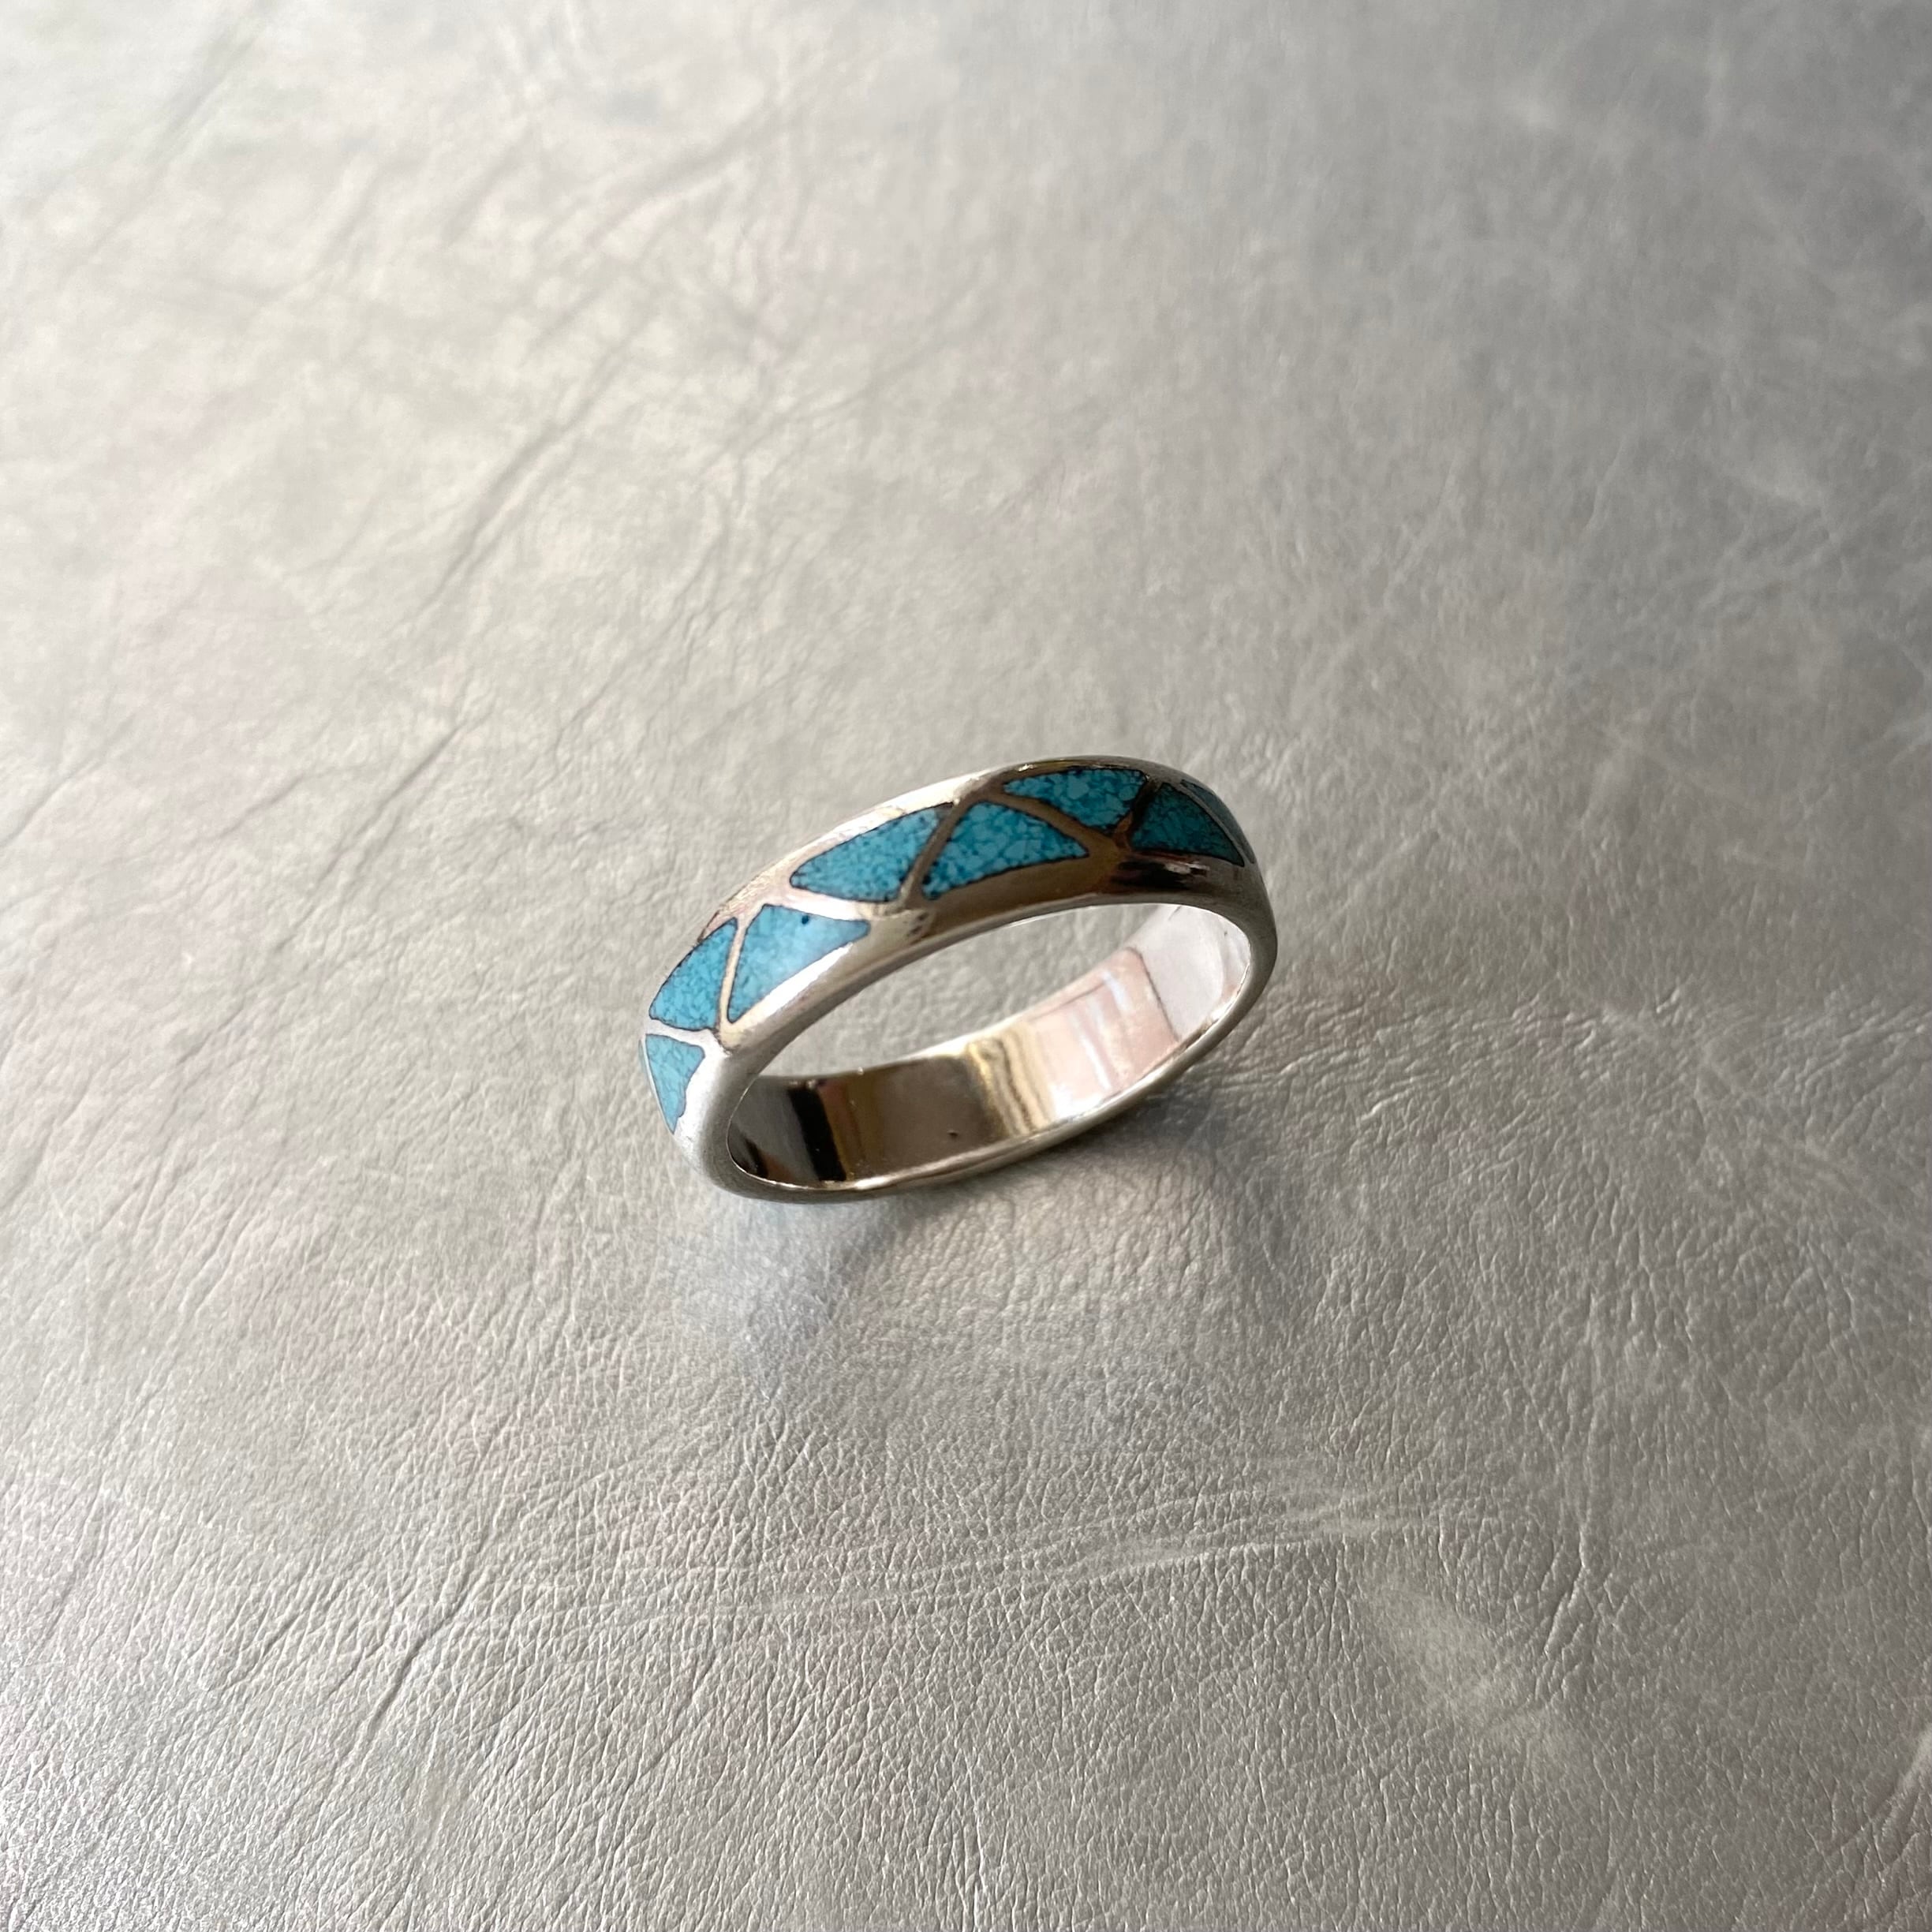 Vintage 70s〜80s USA silver 925 turquoise inlay ring アメリカ